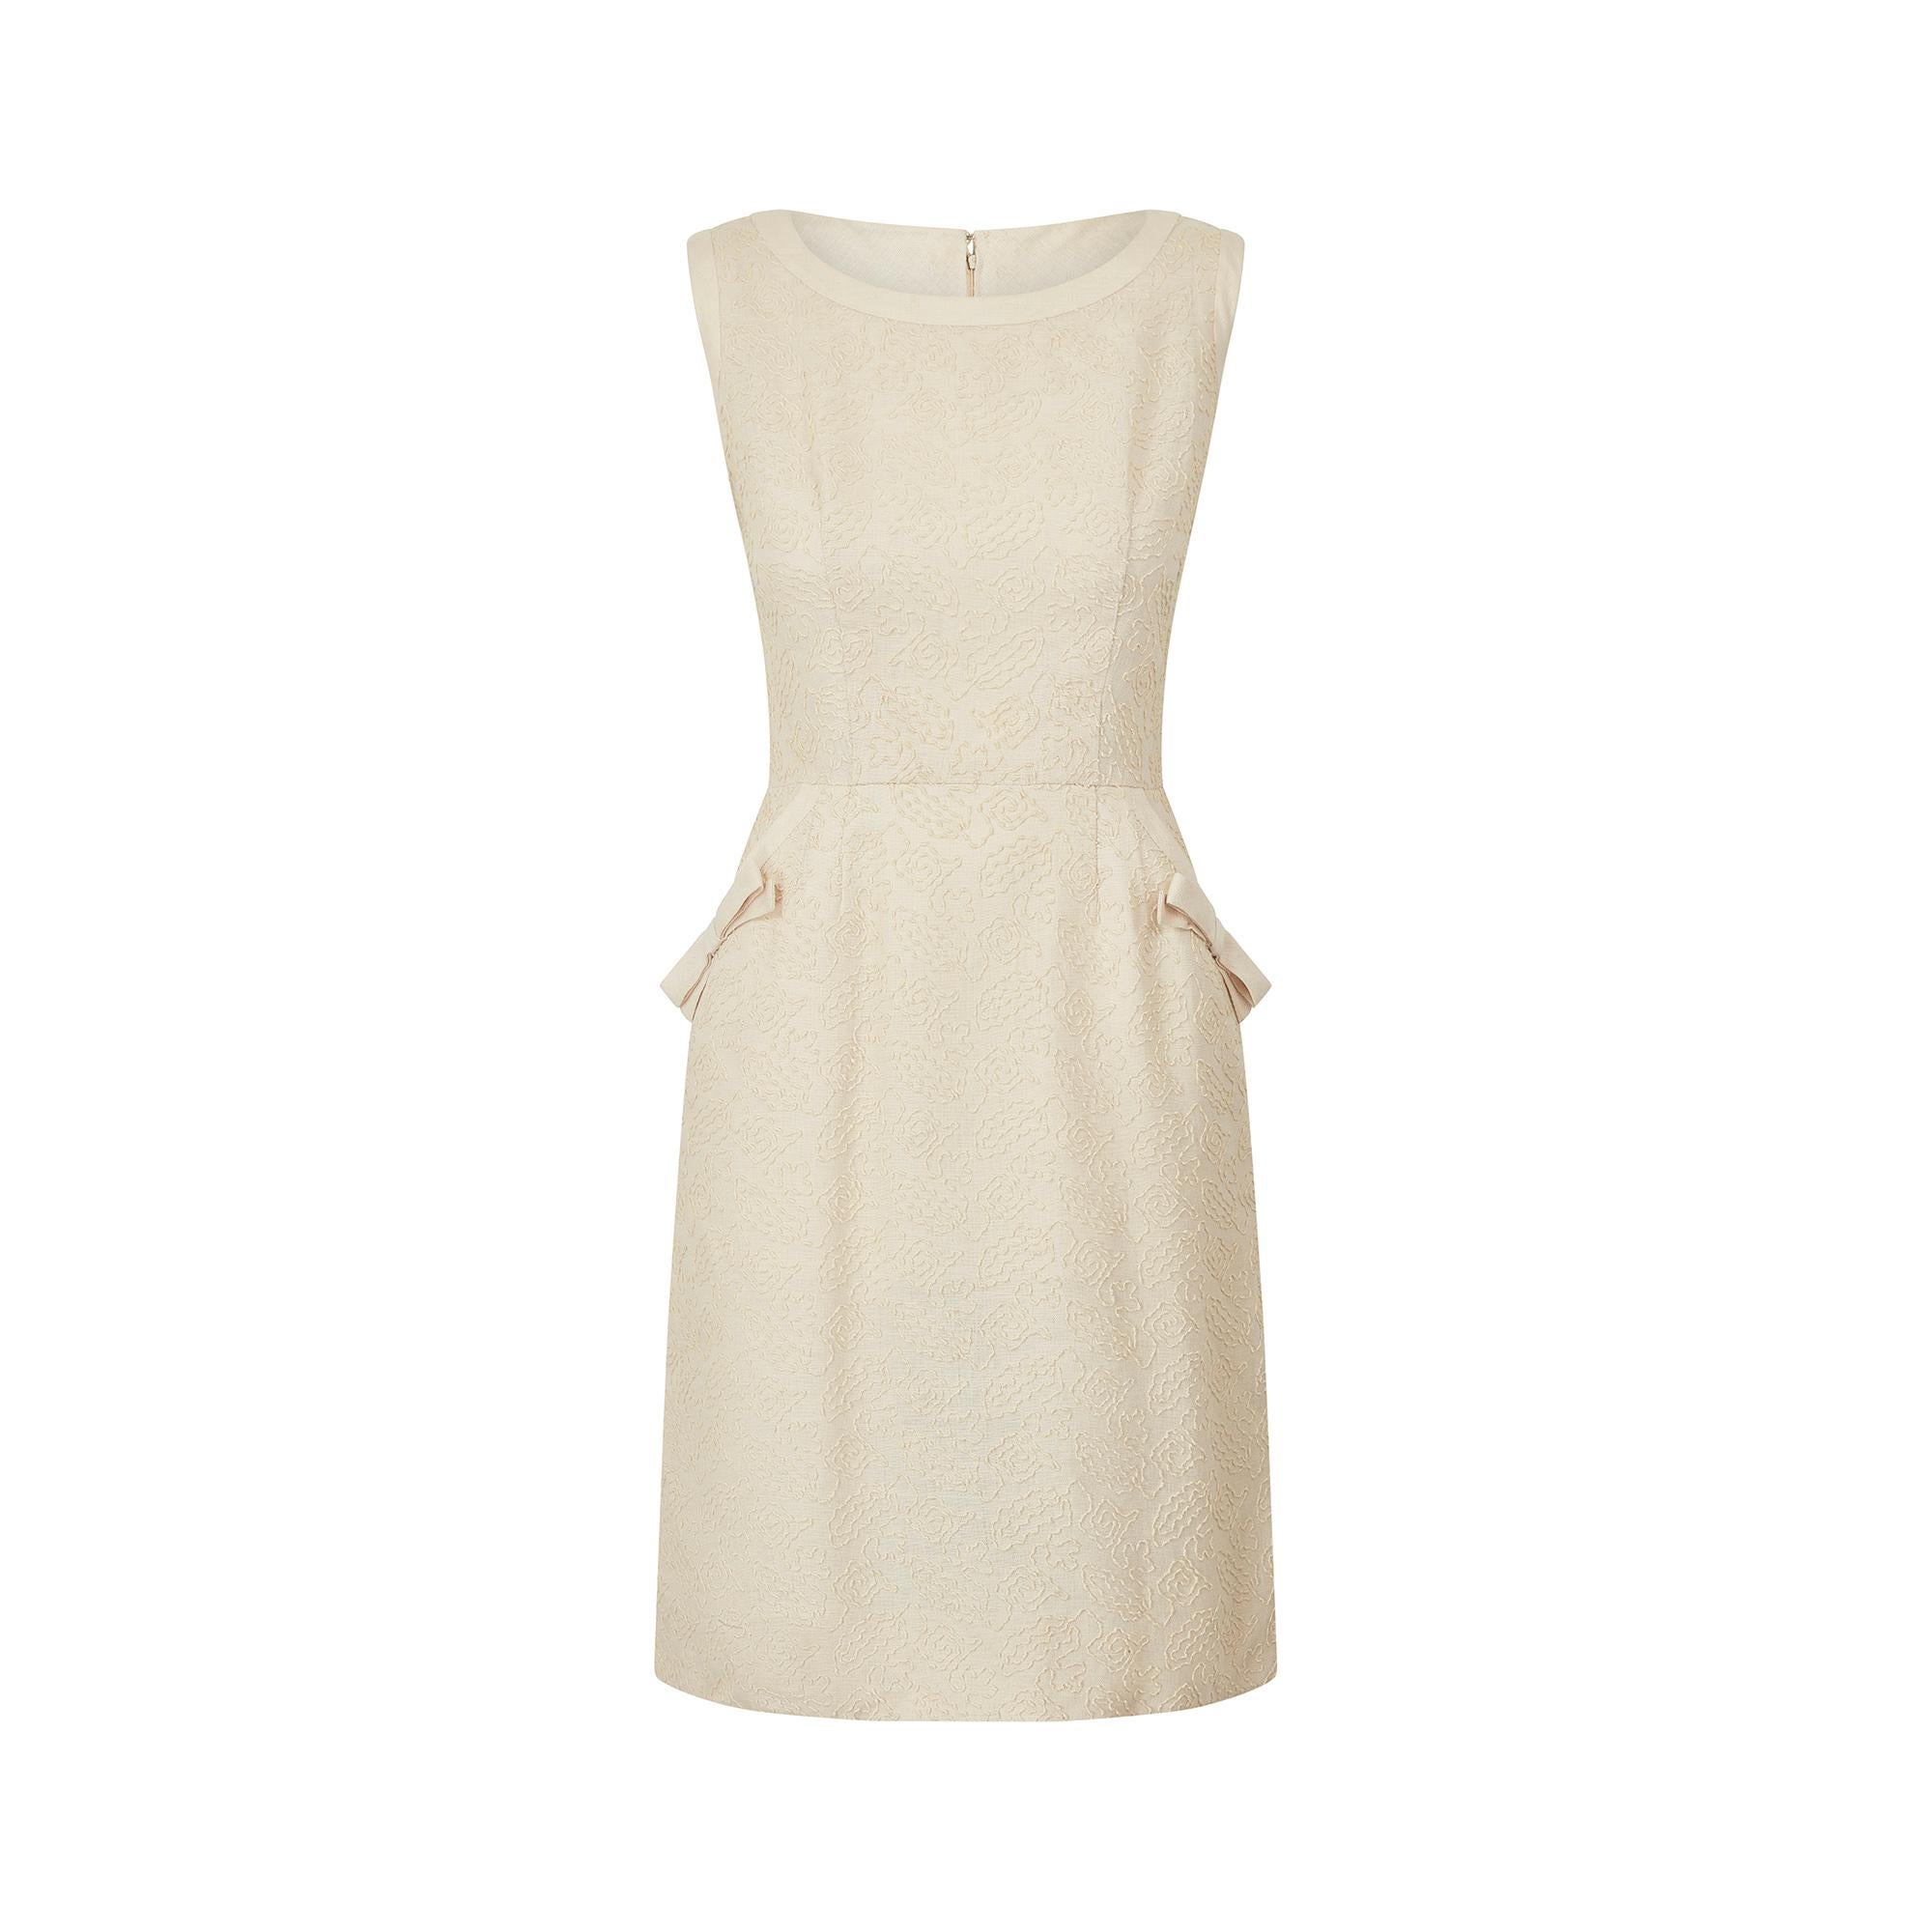 This is a beautifully finished 1960s textured linen work dress in a light cream oatmeal shade. It tapers from the bust to the waist in a classic 60s shift shape and flows down into a pencil silhouette. The rounded neckline and shoulder straps are